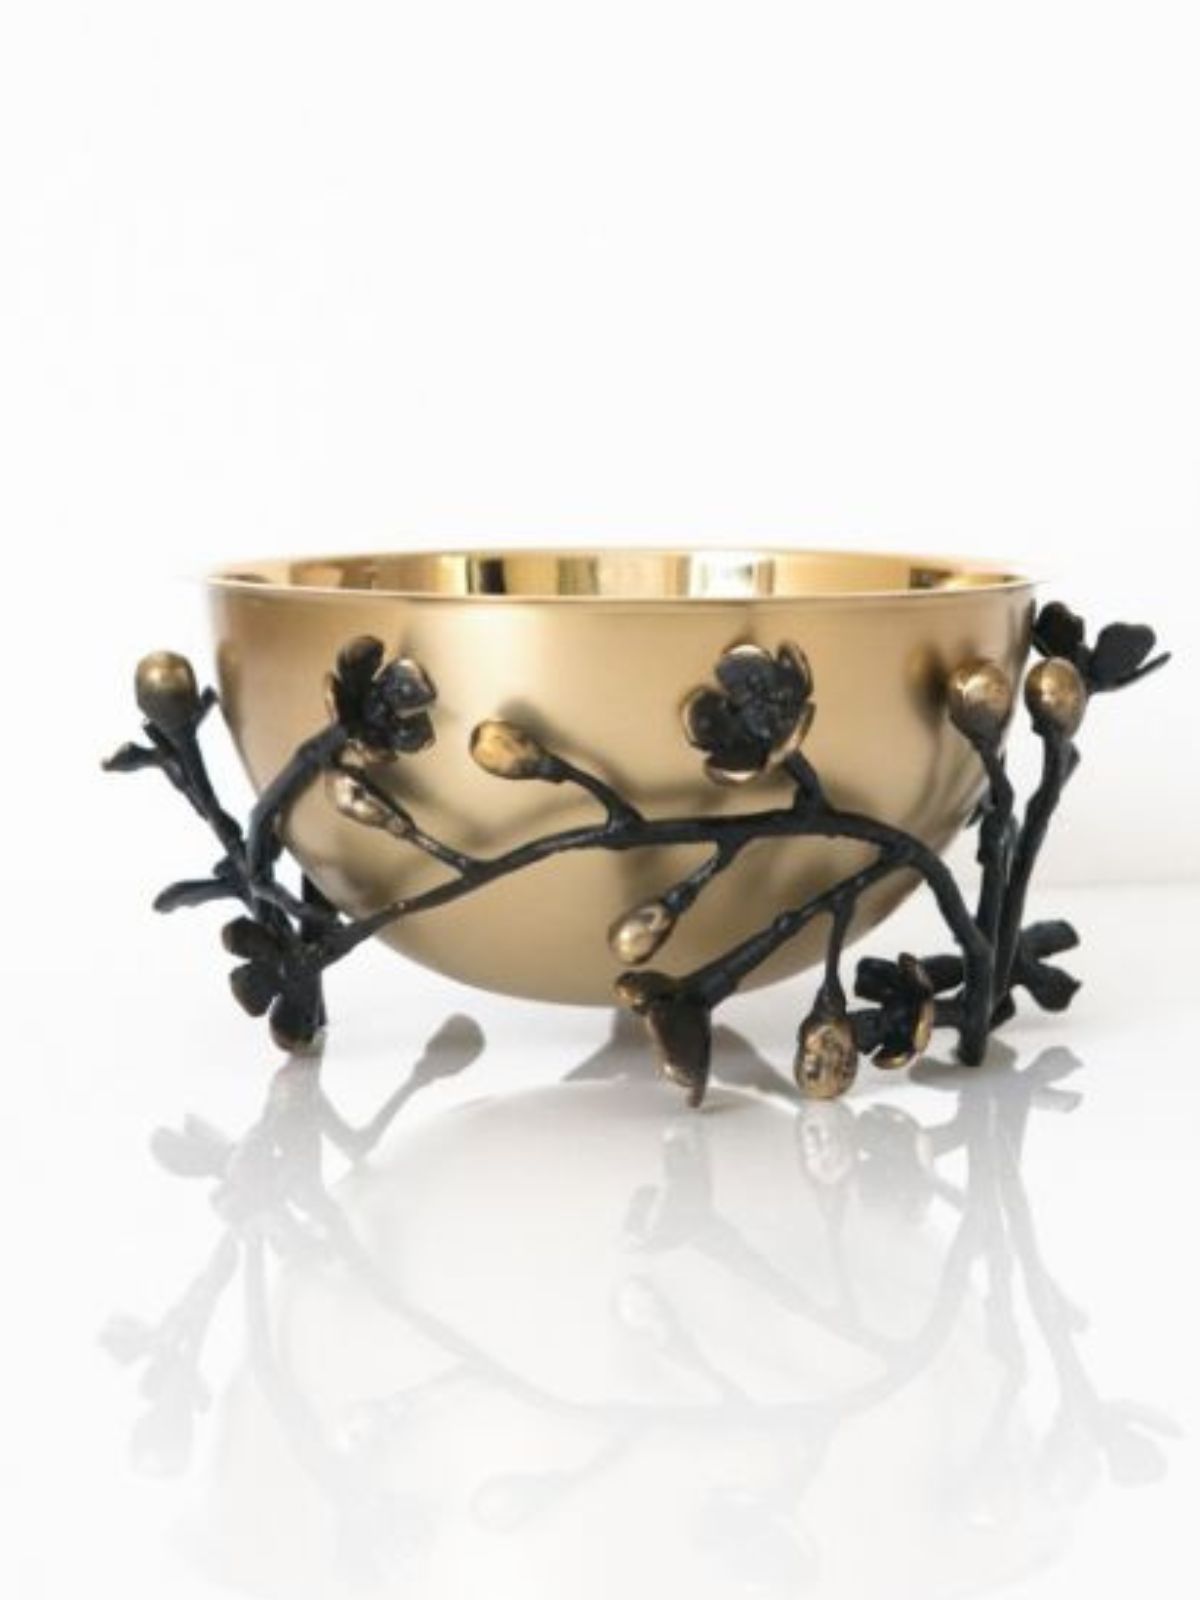 Olive Branch Gold Serving Bowl with Black and Gold Flowers, 10D x 5H.